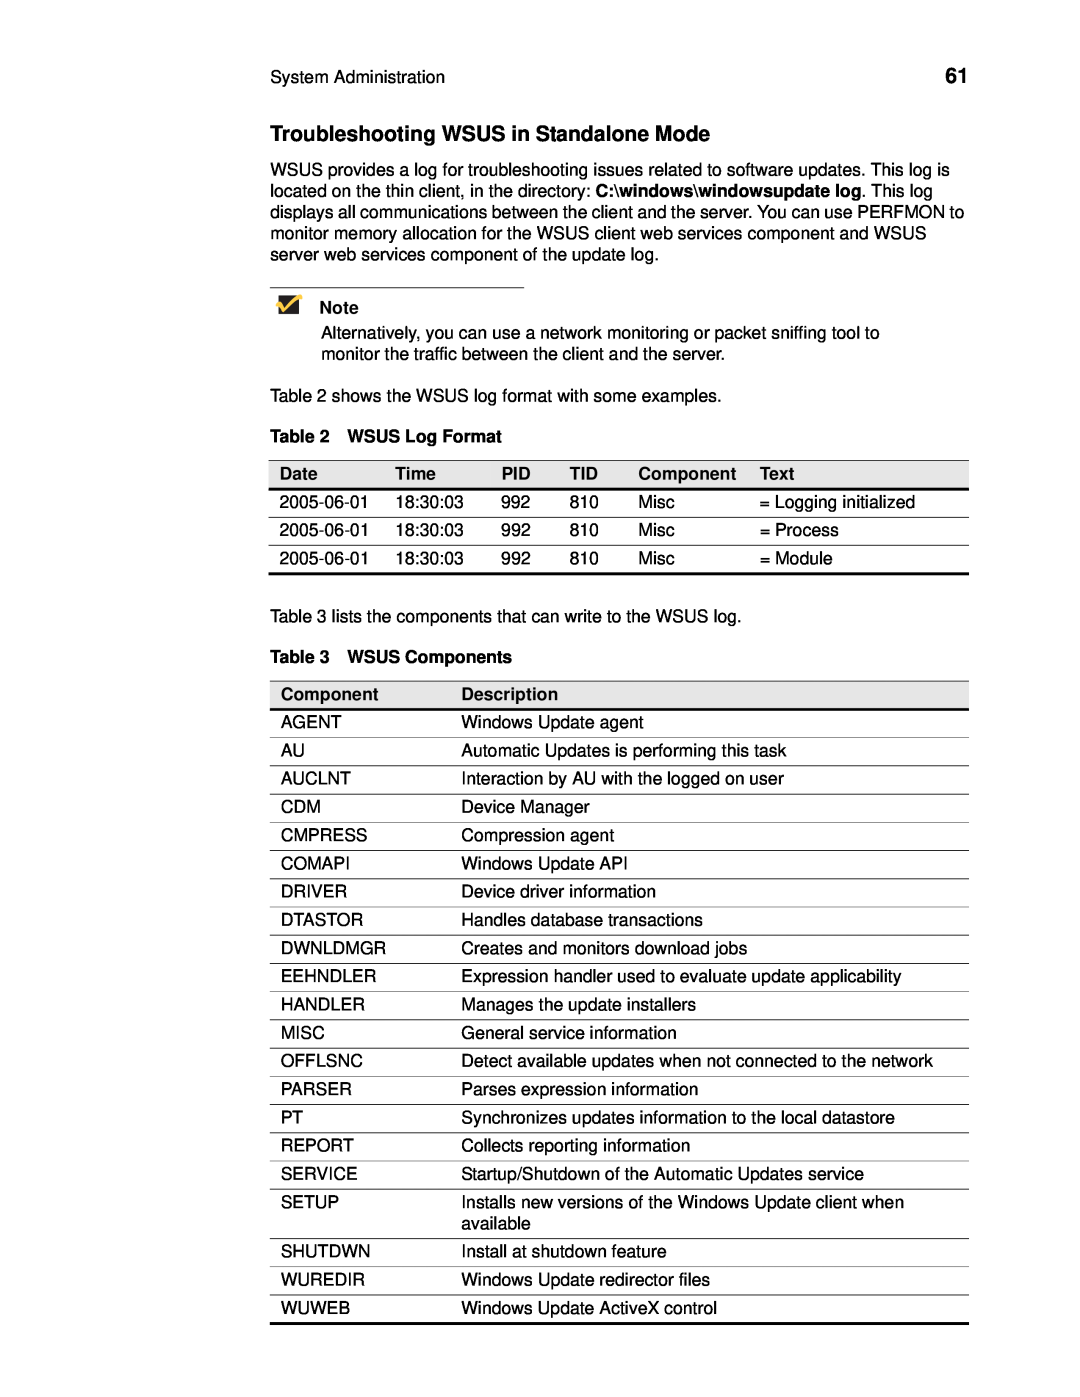 Wyse Technology C90LE Troubleshooting WSUS in Standalone Mode, WSUS Log Format, Date, Time, Component, Text, Description 